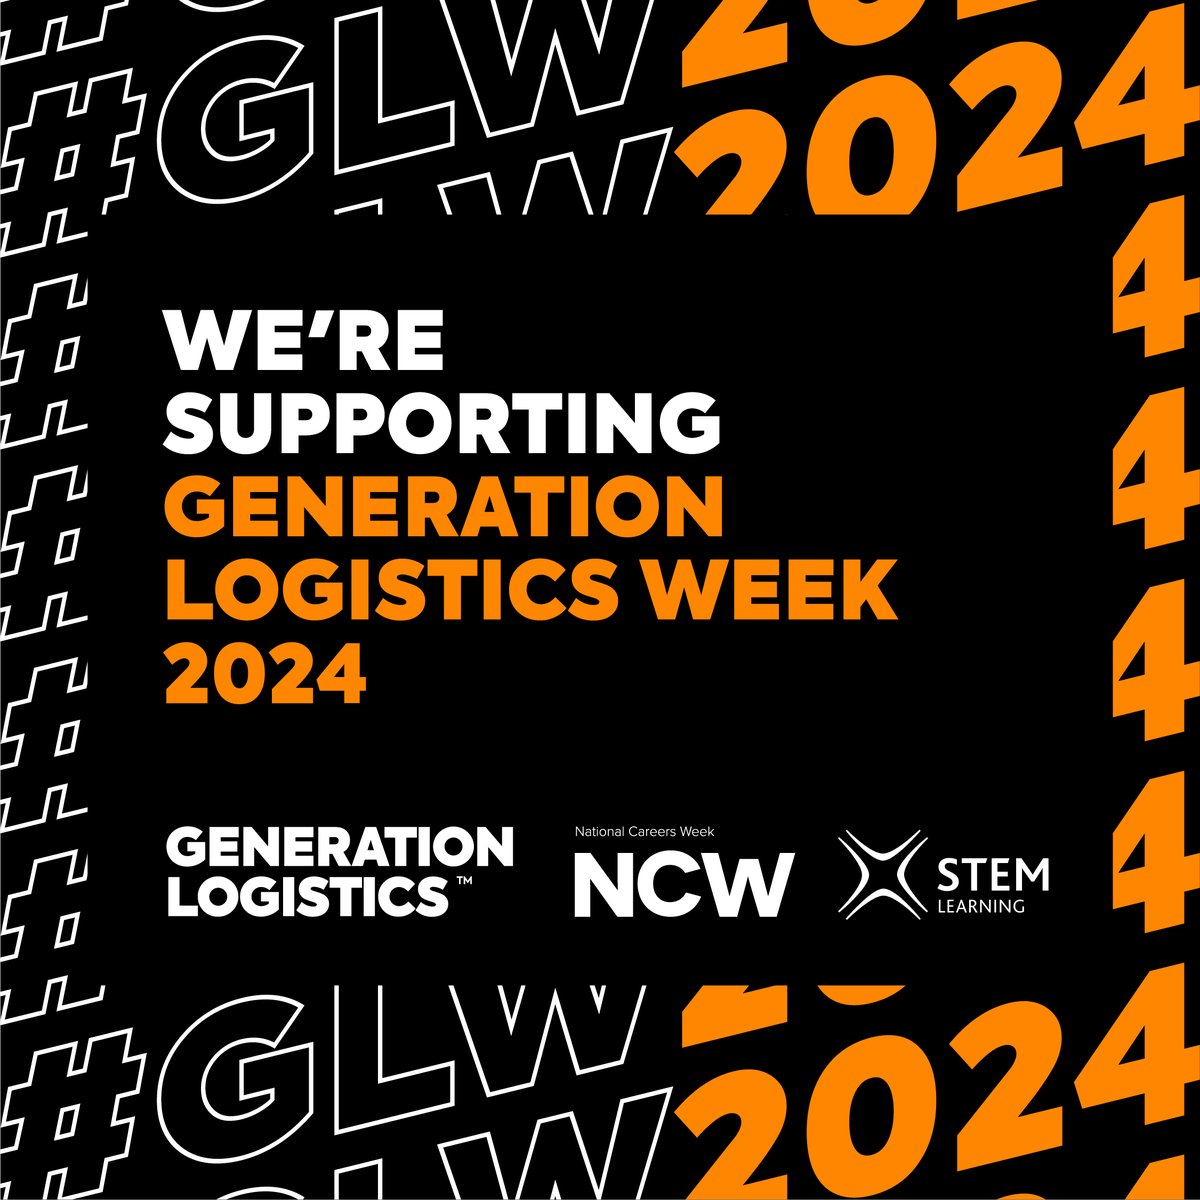 We're supporting 𝙂𝙀𝙉𝙀𝙍𝘼𝙏𝙄𝙊𝙉 𝙇𝙊𝙂𝙄𝙎𝙏𝙄𝘾𝙎 𝙒𝙀𝙀𝙆 🗓️24th - 28th June. Official hashtag #GLW2024 Find out more here 👇 generationlogistics.org In partnership with @Gen_Logistics @STEMLearningUK RT 🔁 Tag 🏷 Join us 👥